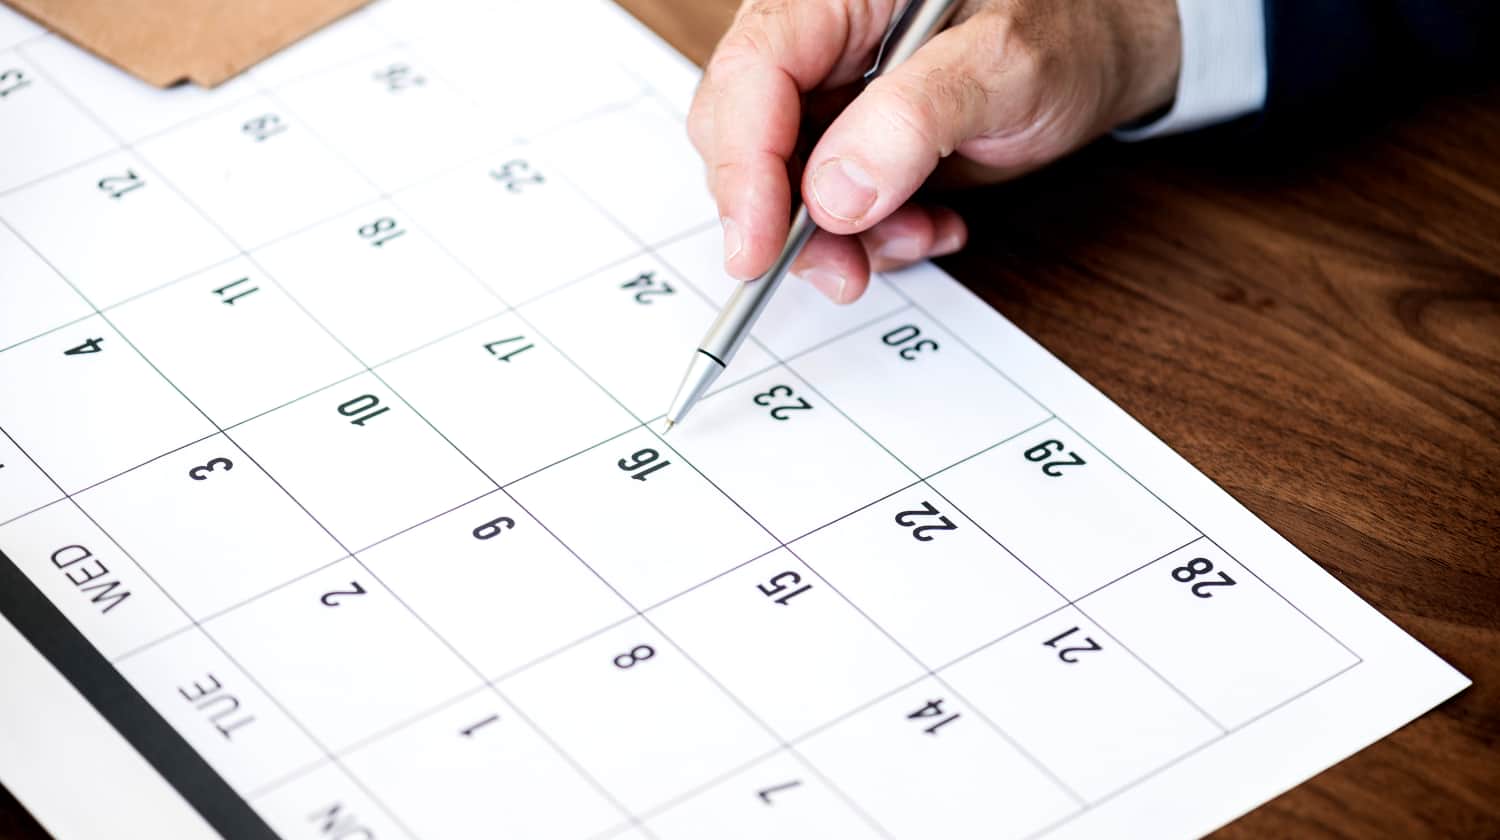 Calendar | When Are Taxes Due? Know Your 2019 Deadlines